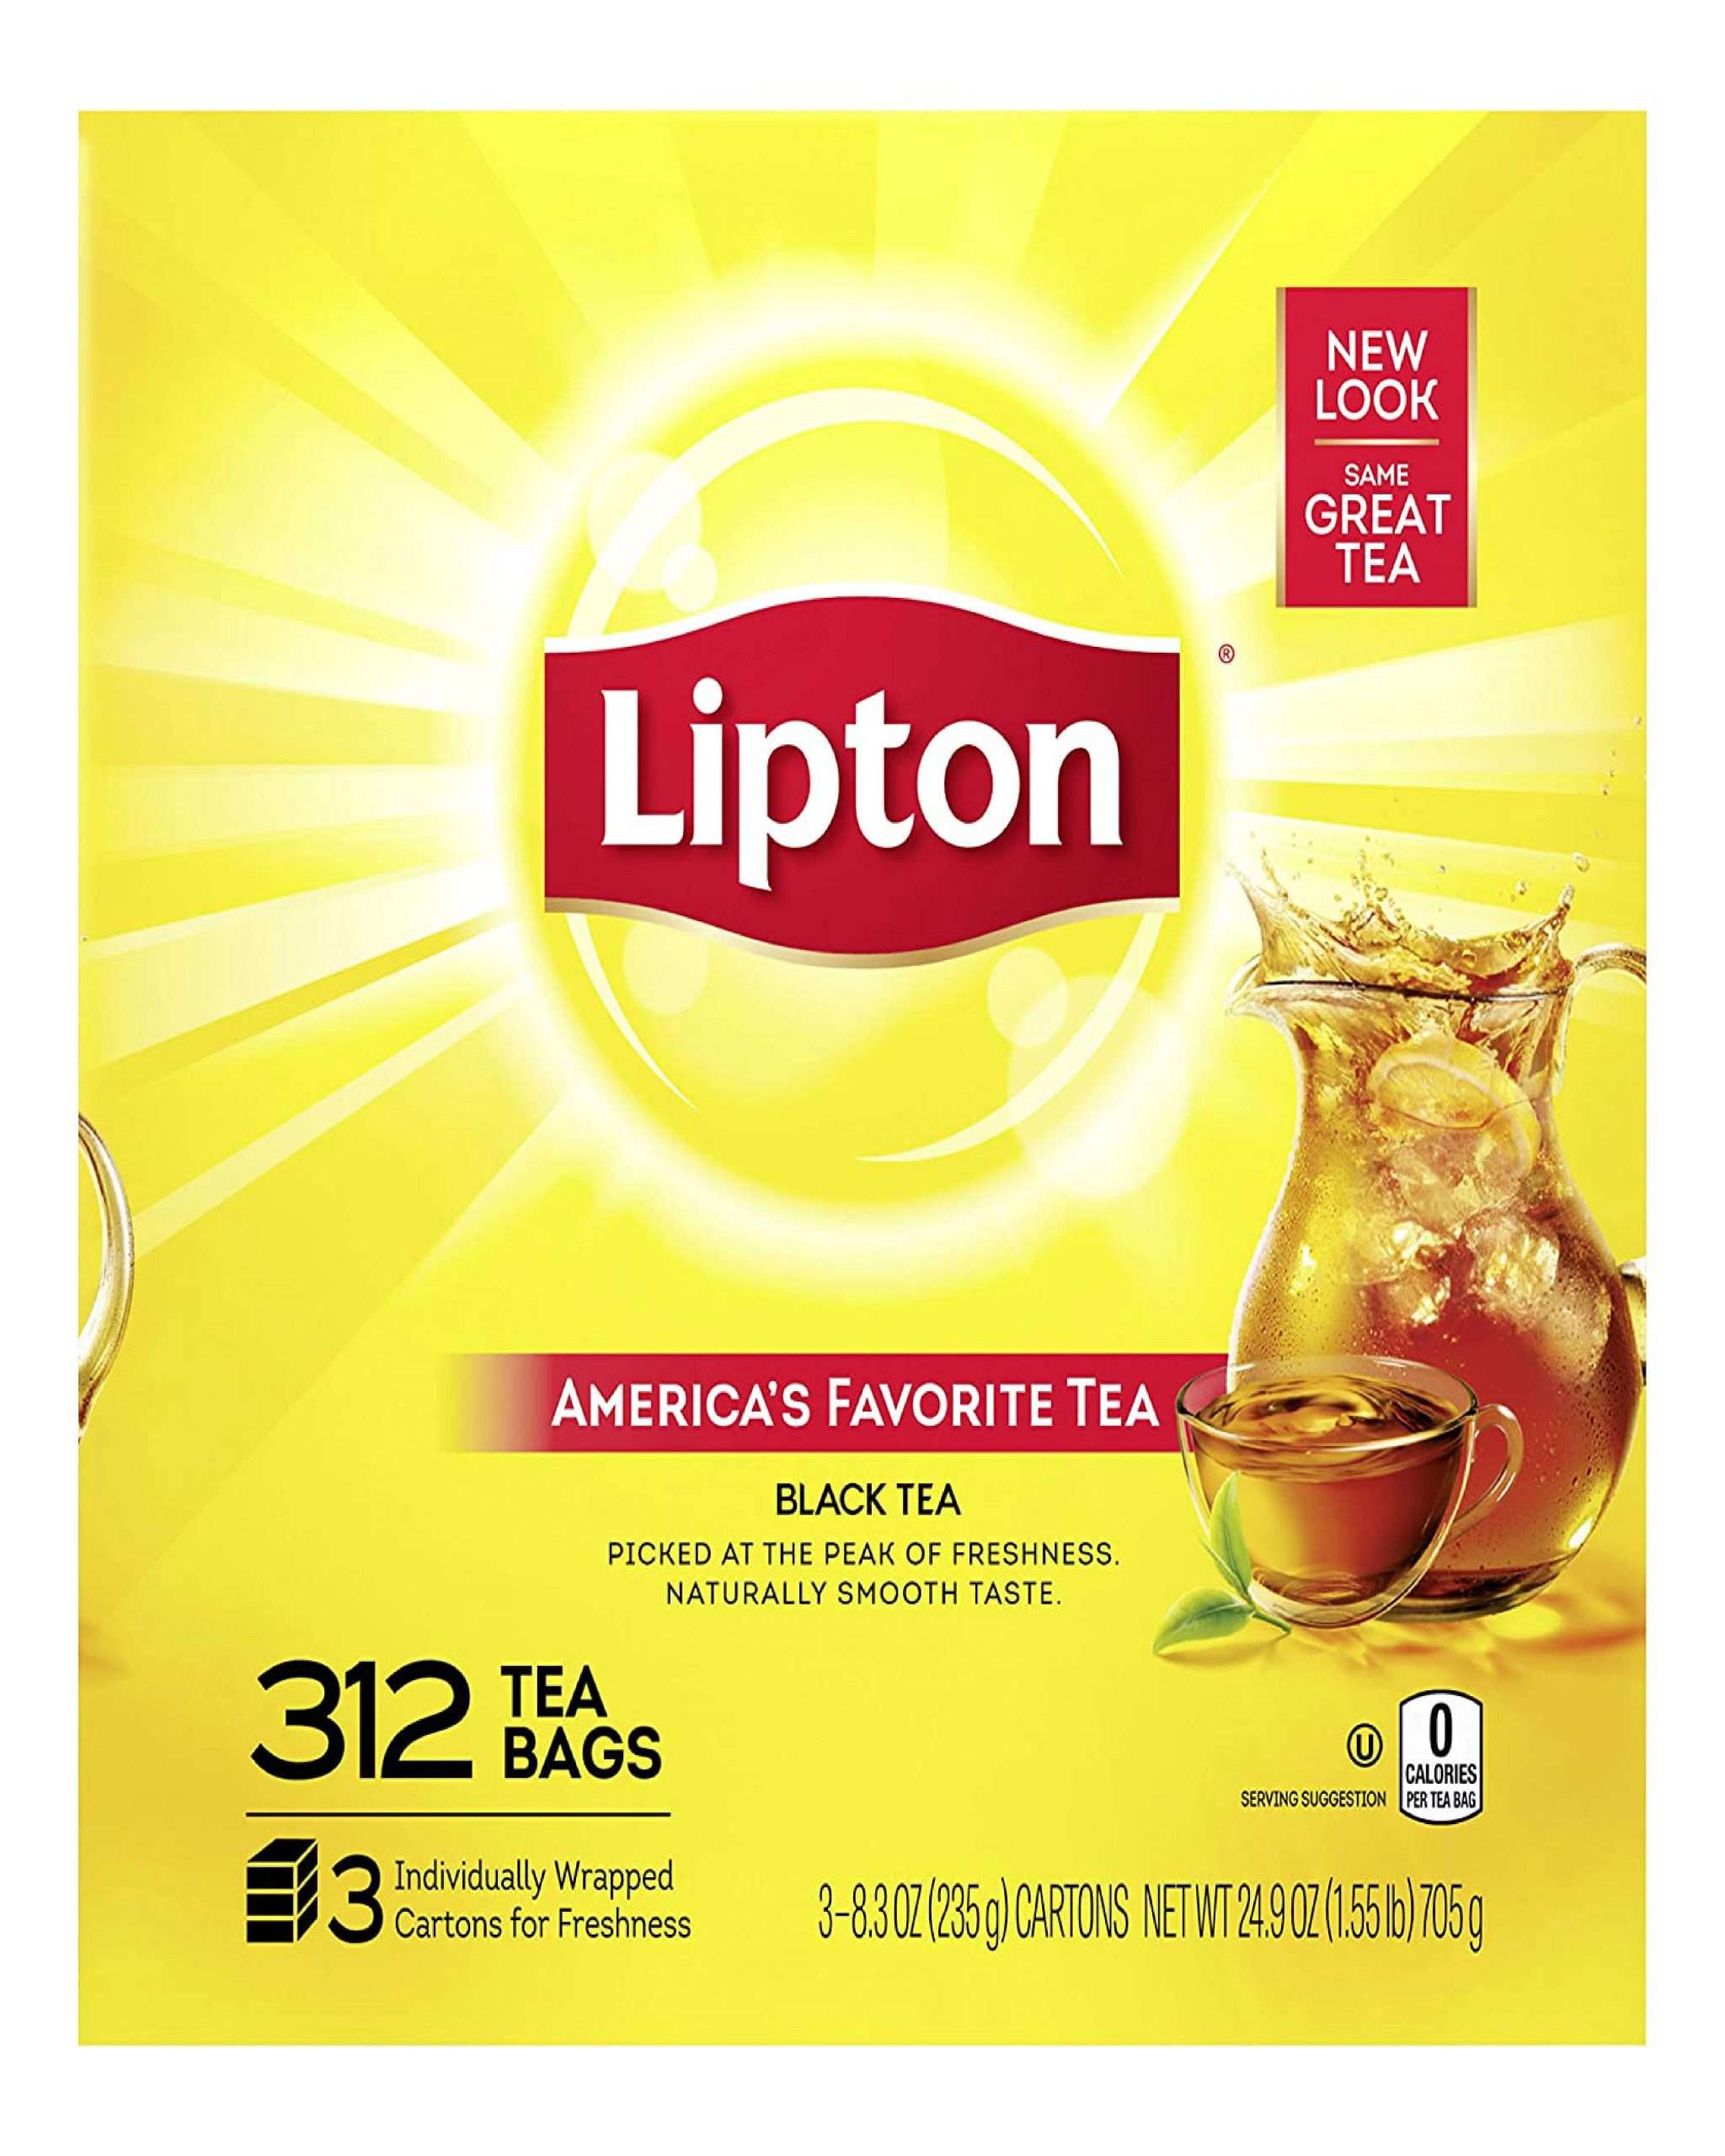 Lipton Tea Bags For A Naturally Smooth Taste Black Tea Can Help Support ...